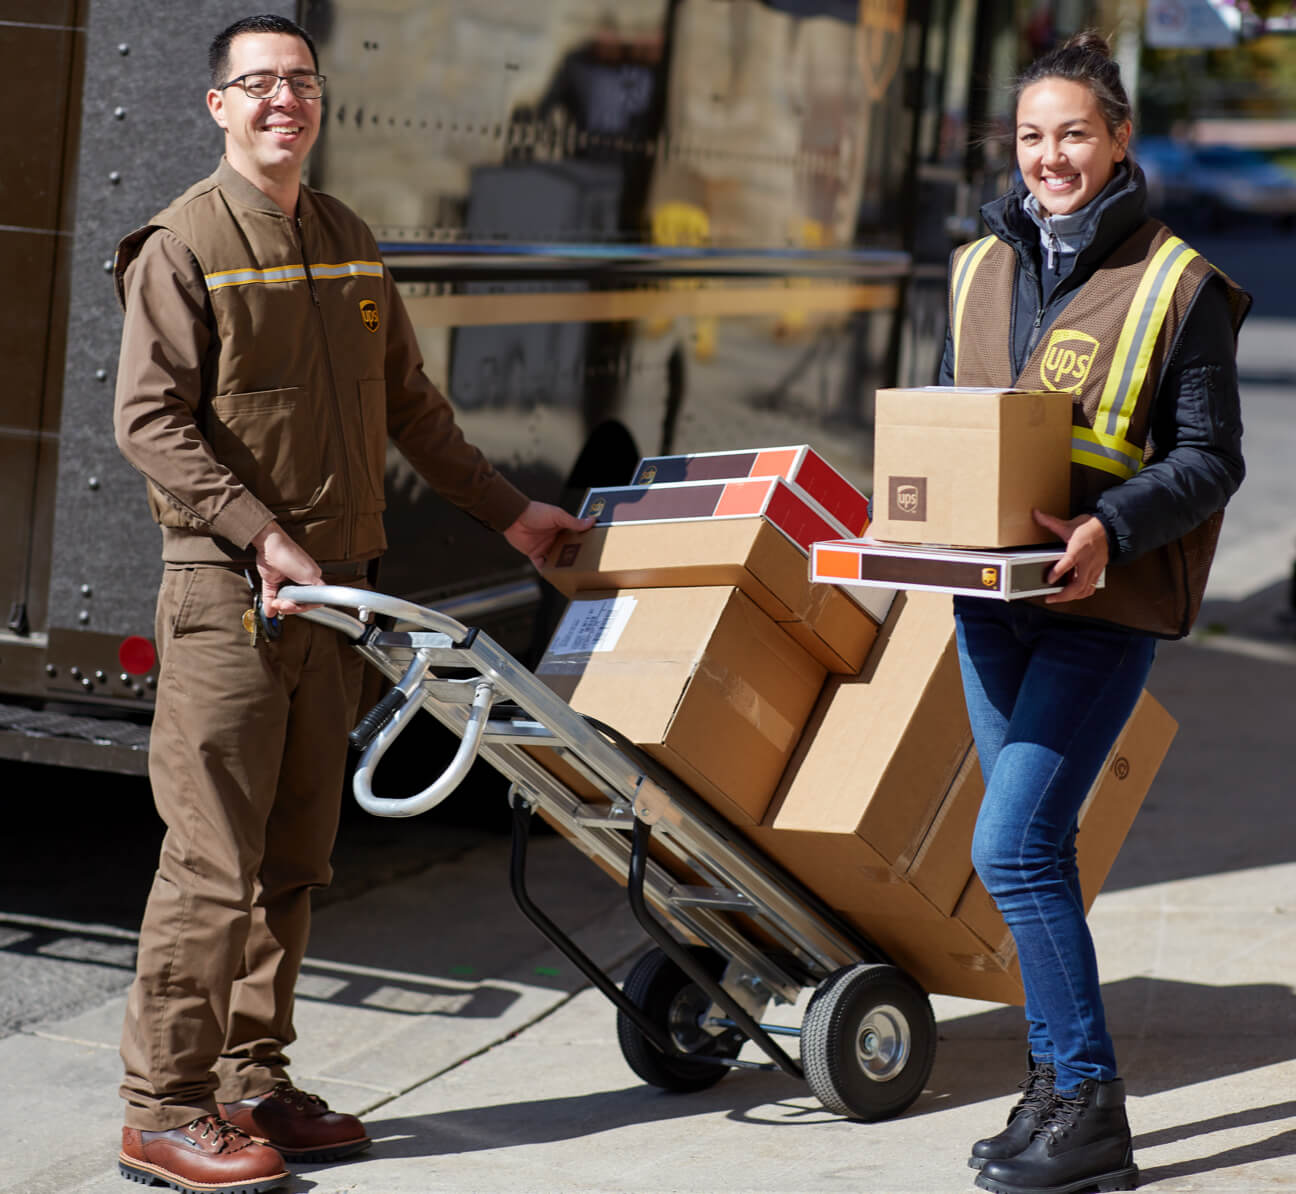 Two UPS employees loading up a dolly with packages